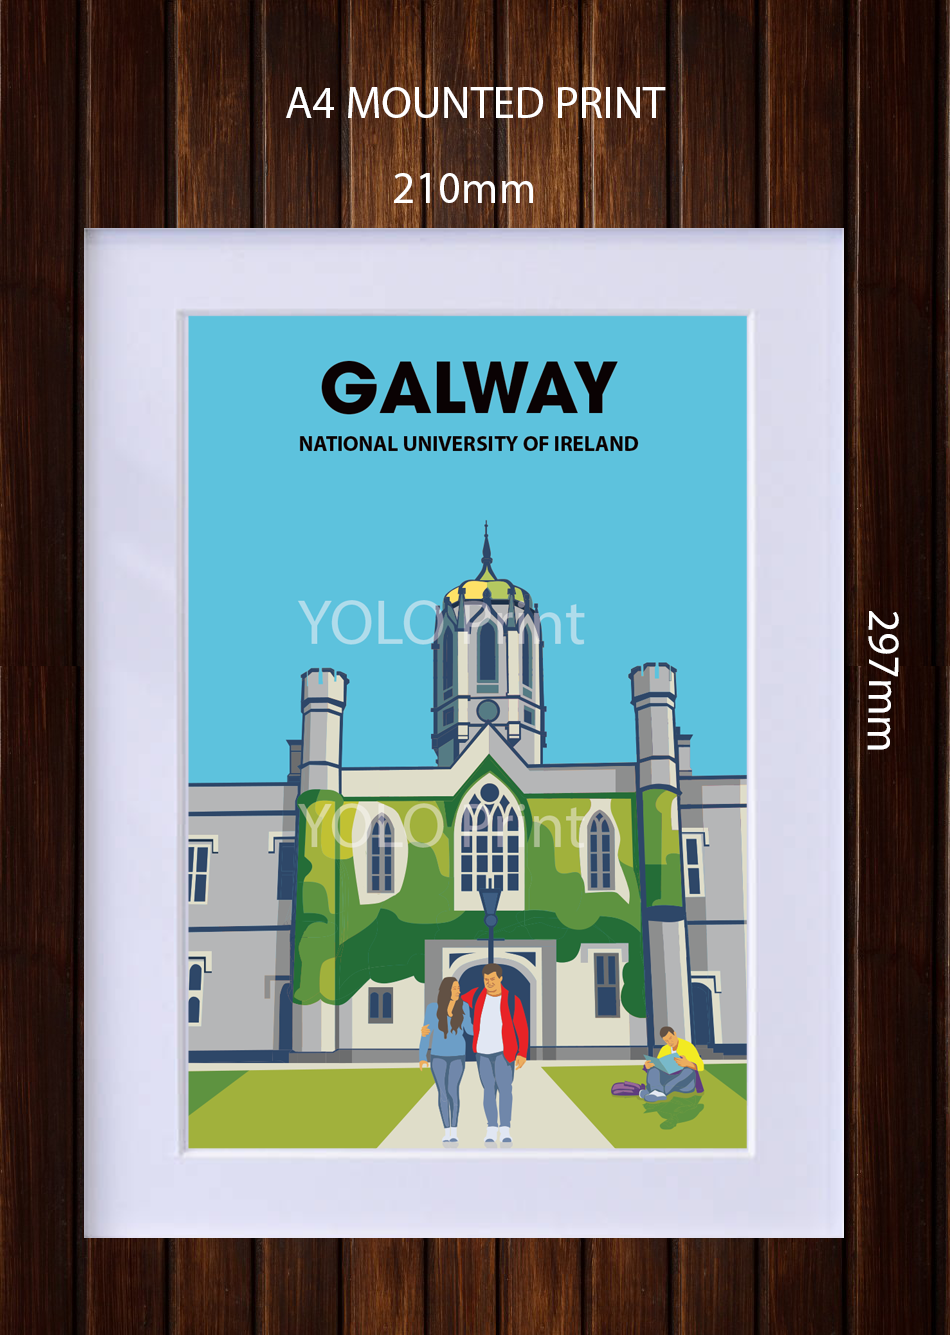 Galway Postcard or a4 Mounted Print  - NUI